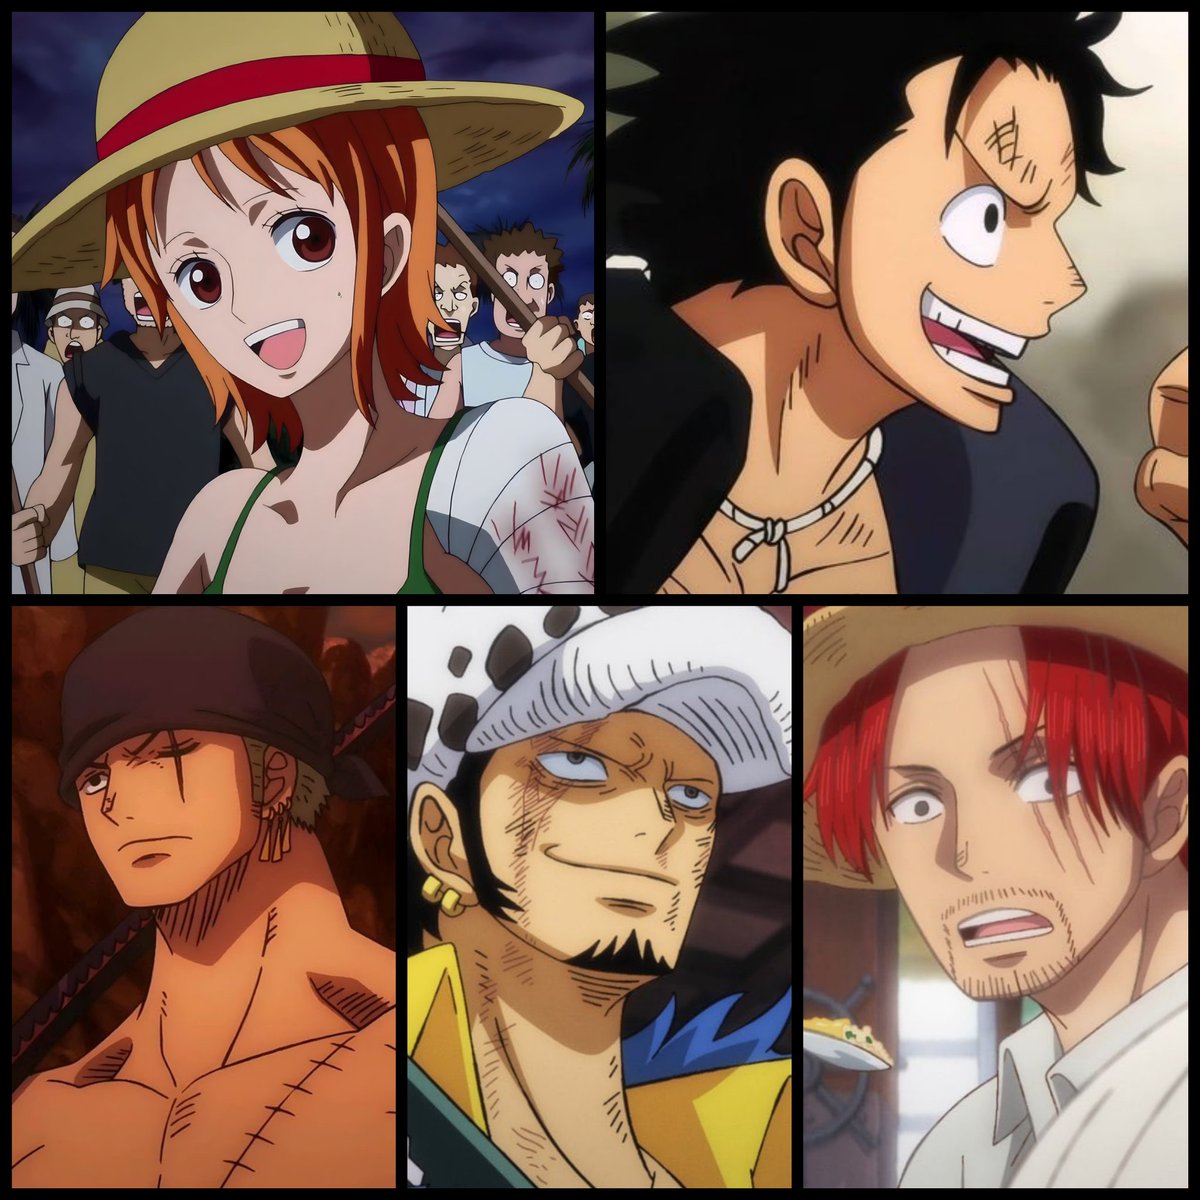 My Top 5 One Piece characters :

1. Nami  
2. Luffy
3. Zoro 
4. Law
5. Shanks